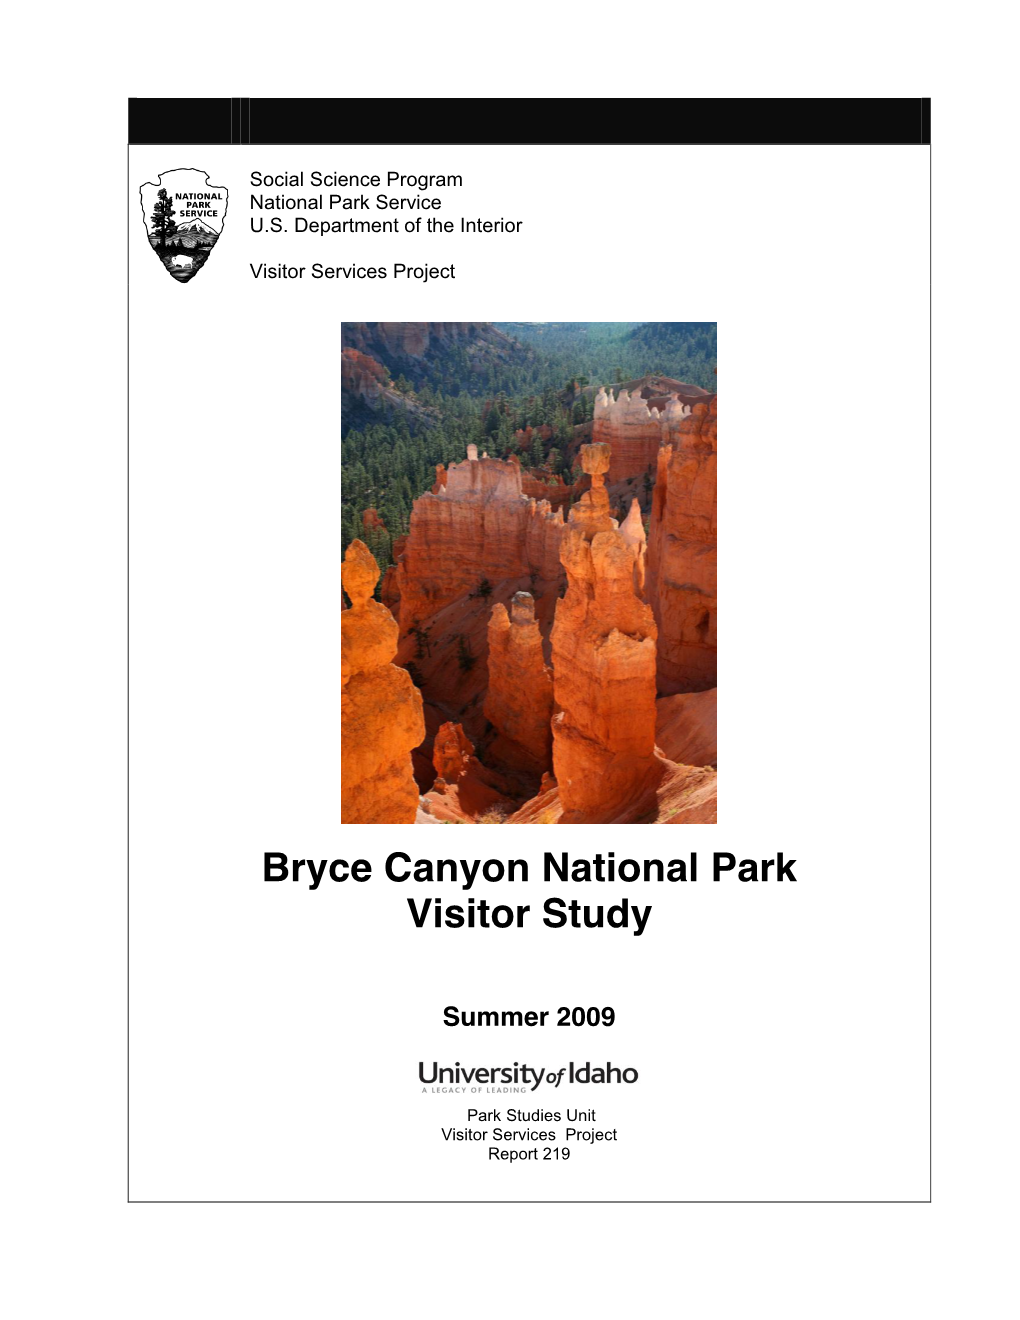 Bryce Canyon National Park Visitor Study